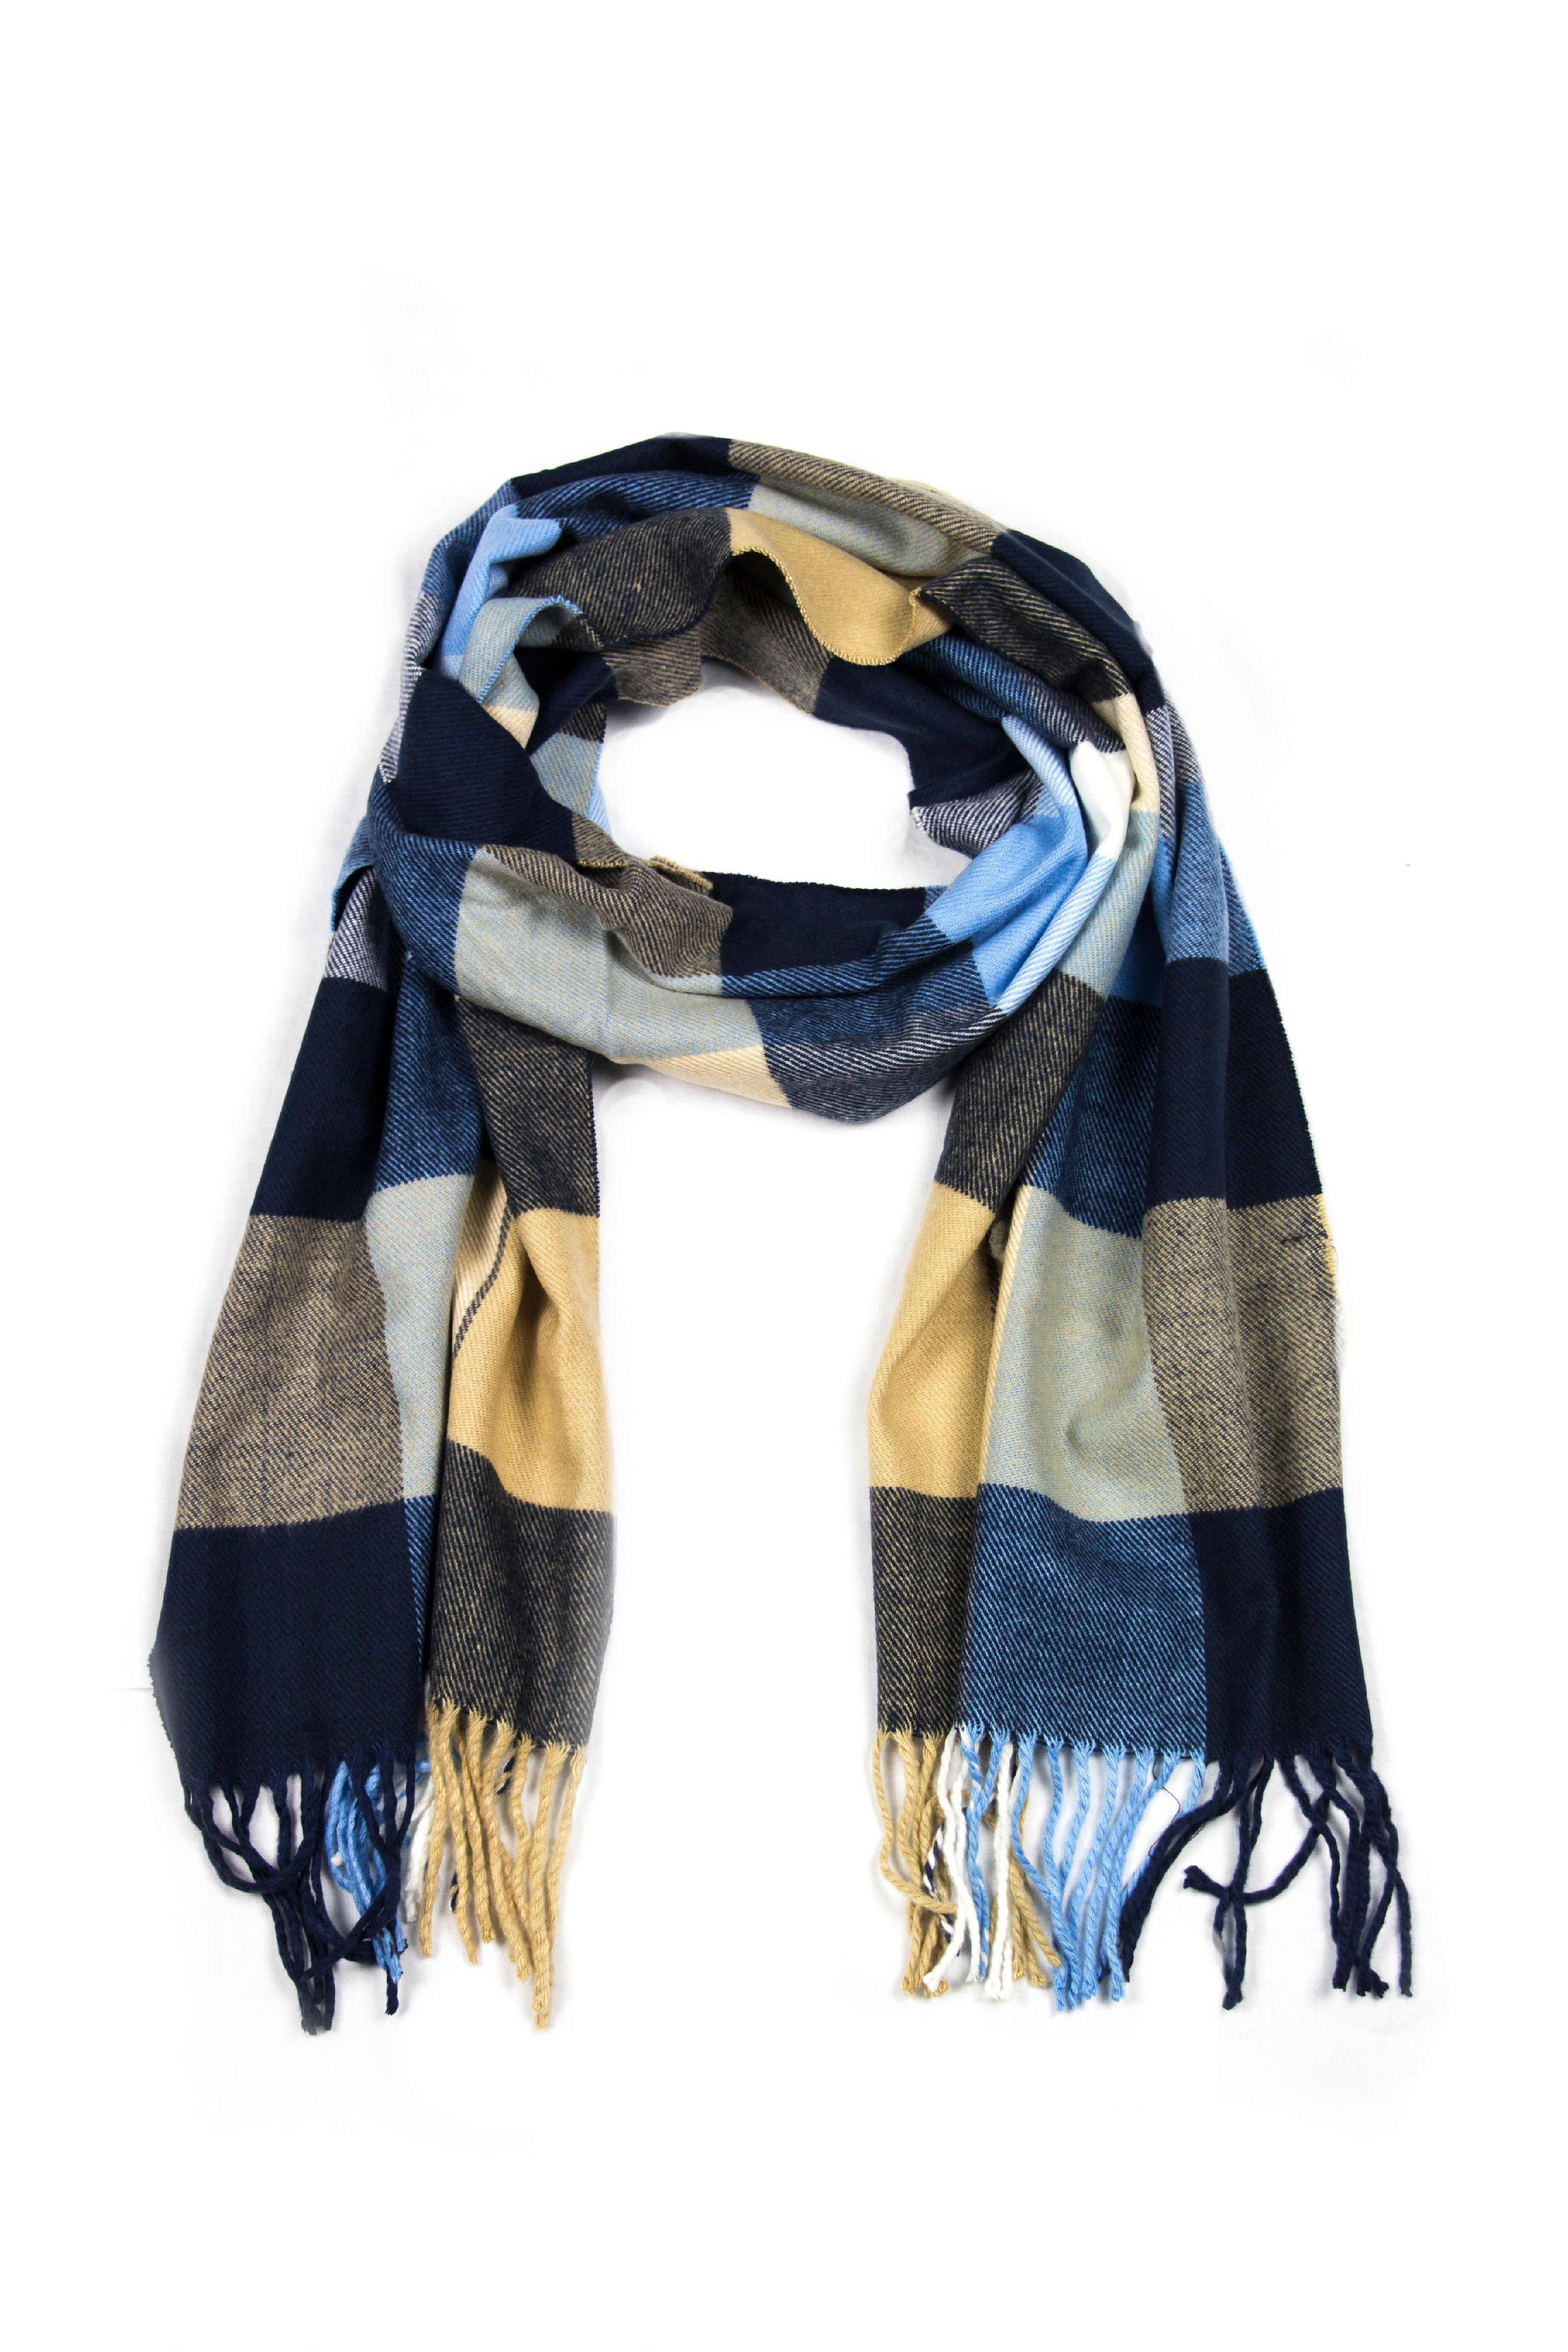 Sakkas Booker Cashmere Feel Solid Colored Unisex Winter Scarf With Fringe